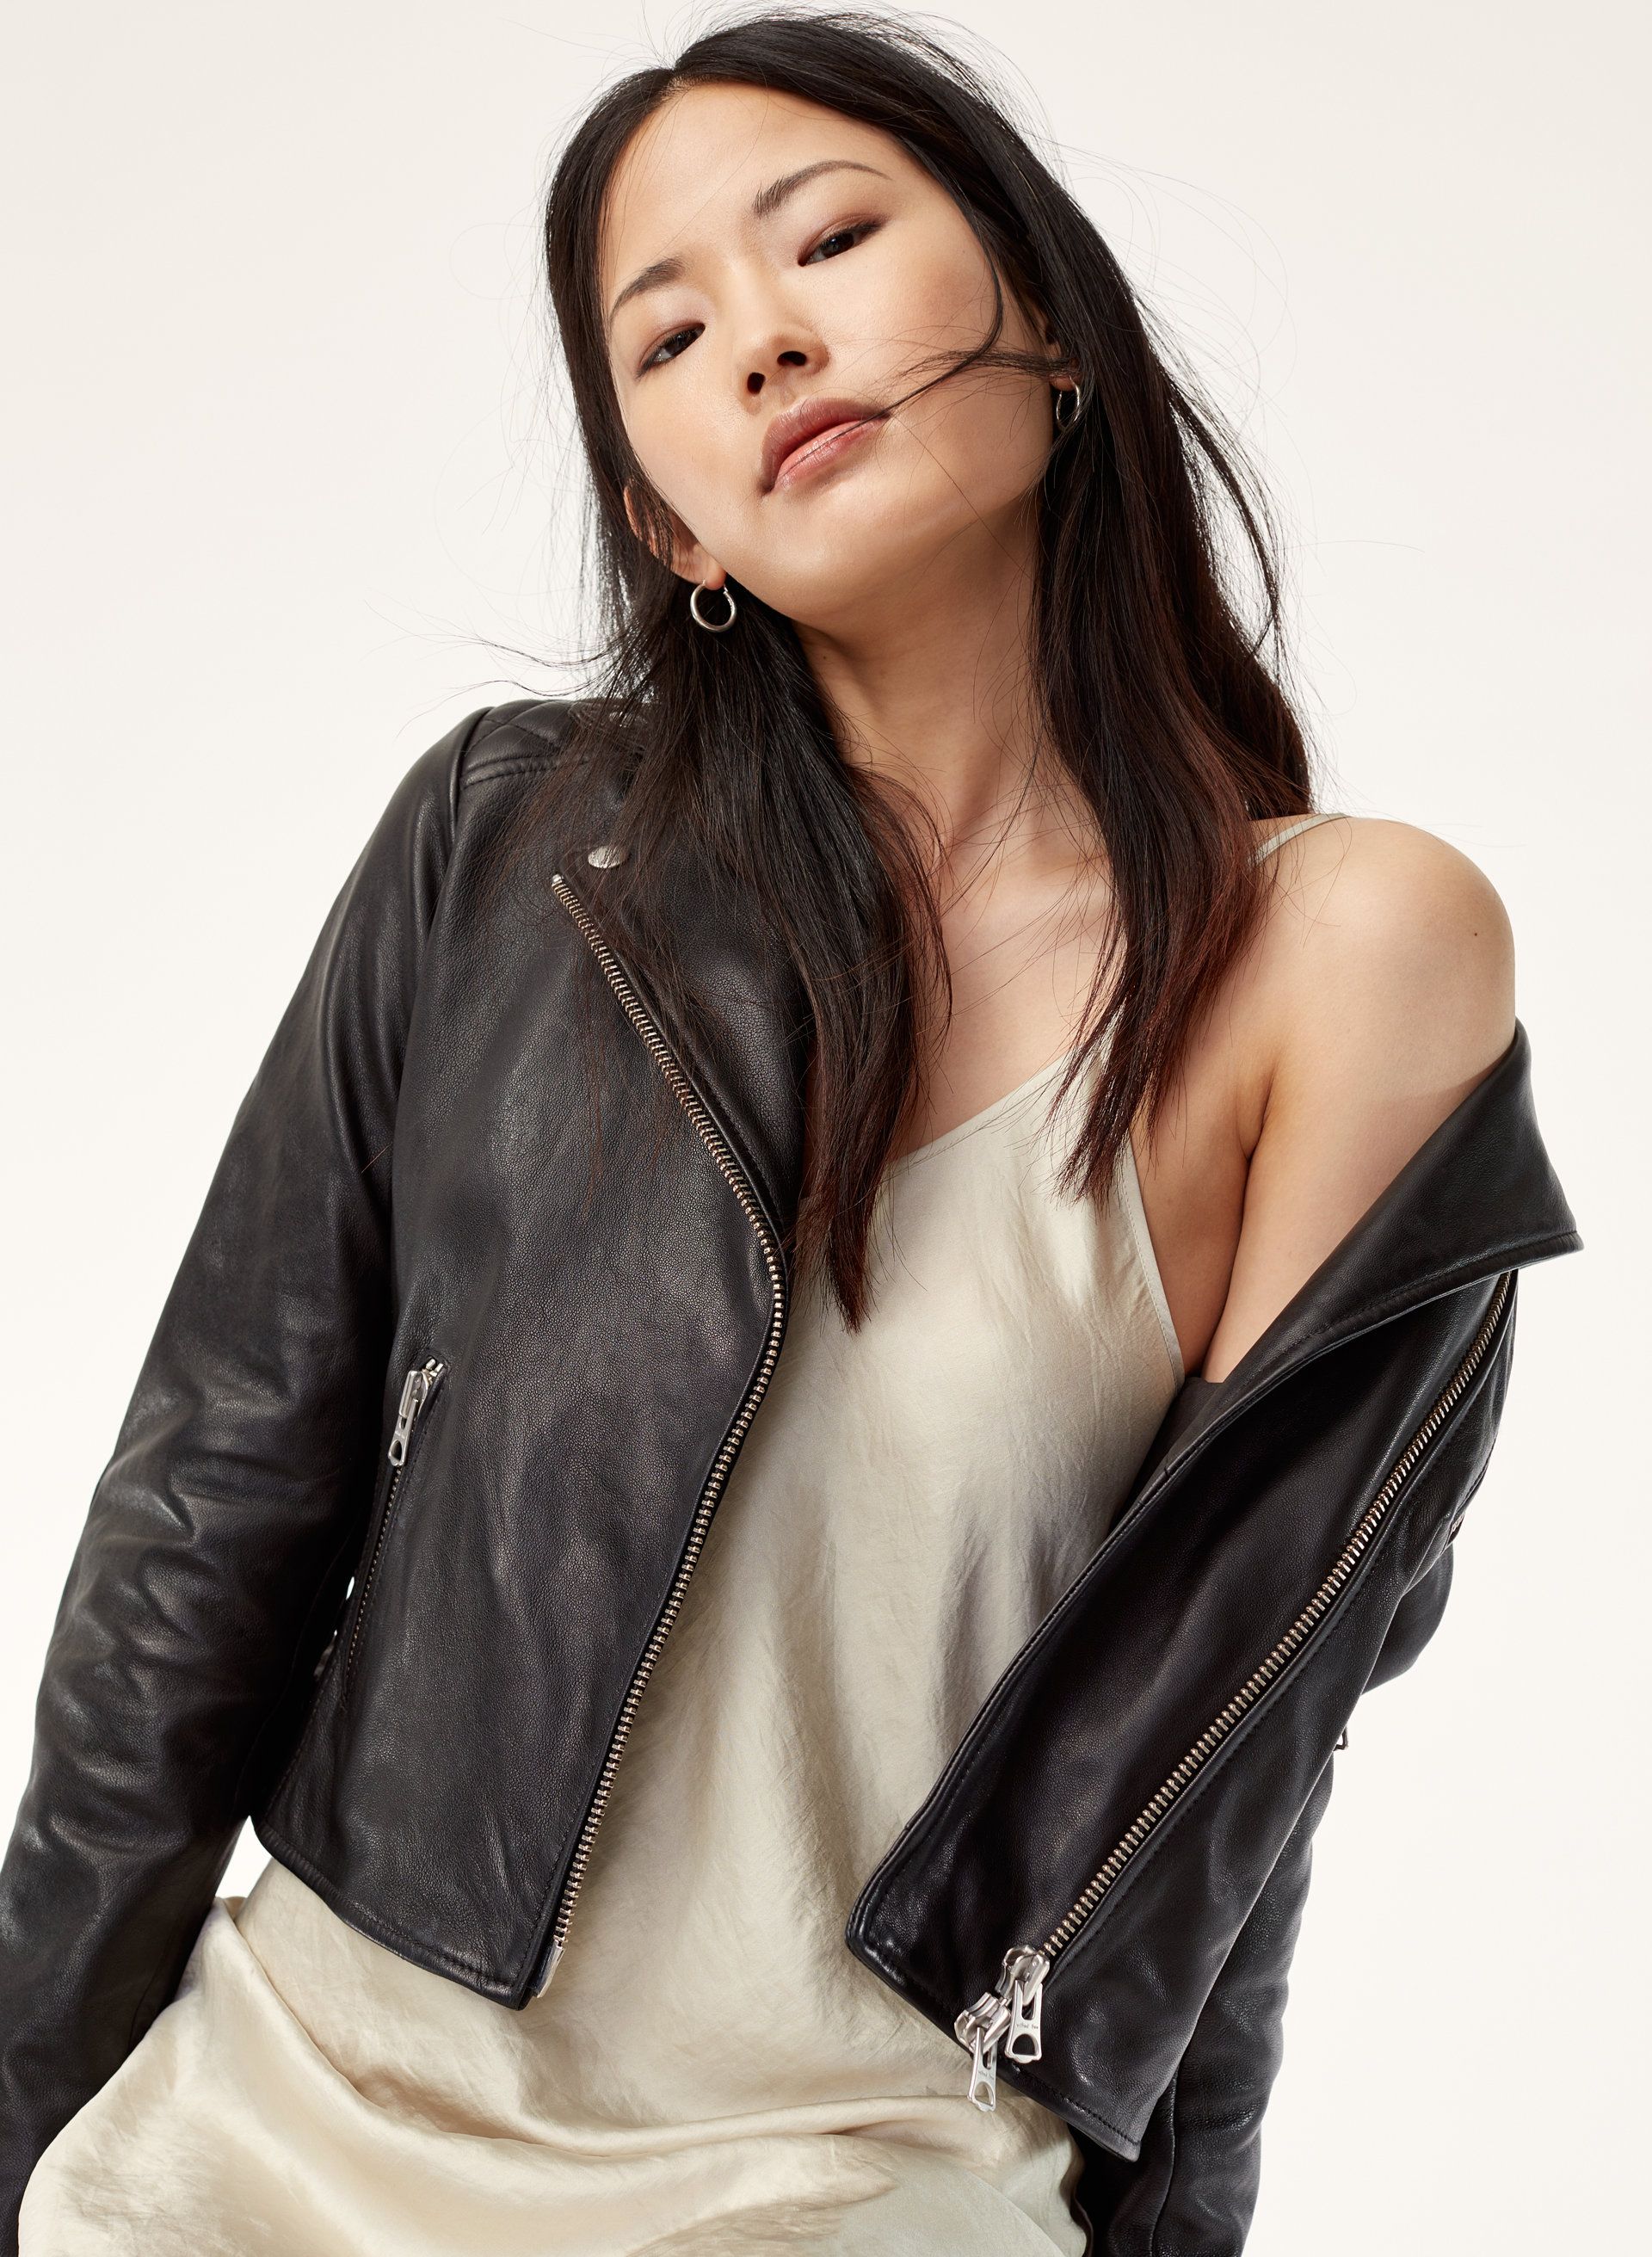 in the market for a new leather jacket? aritzia’s got you